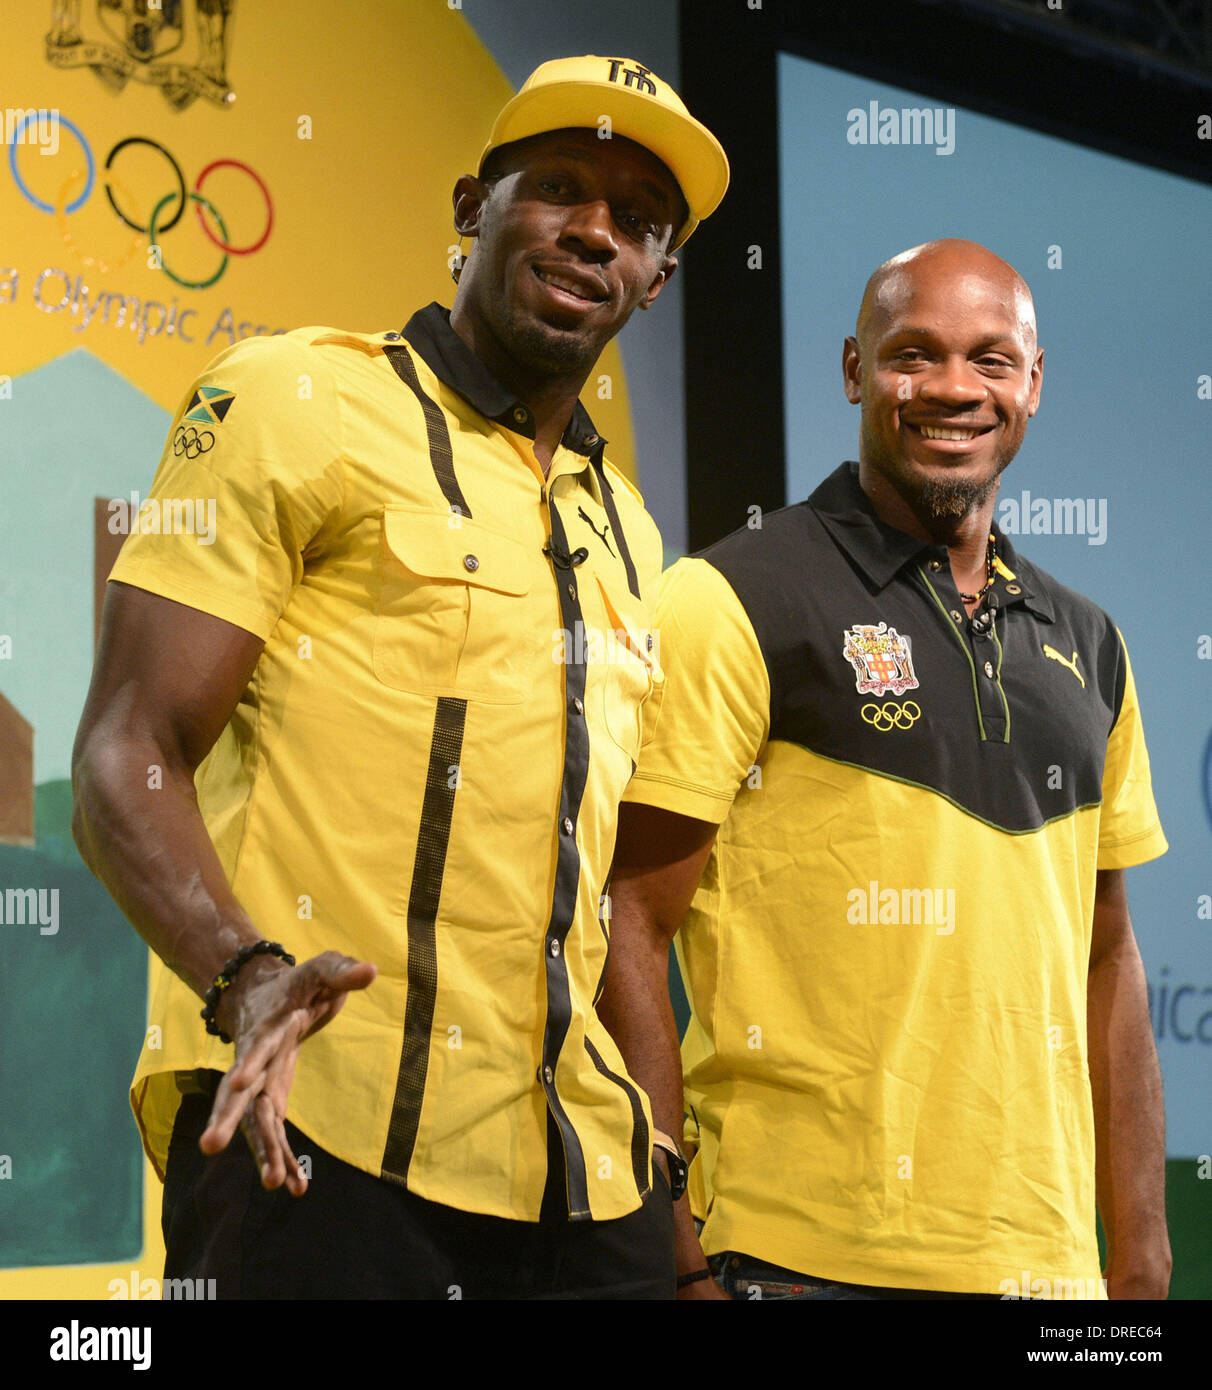 Usain Bolt of Jamaica and teammate Asafa Powell  attend a press conference in London London, England - 26.07.12 Stock Photo